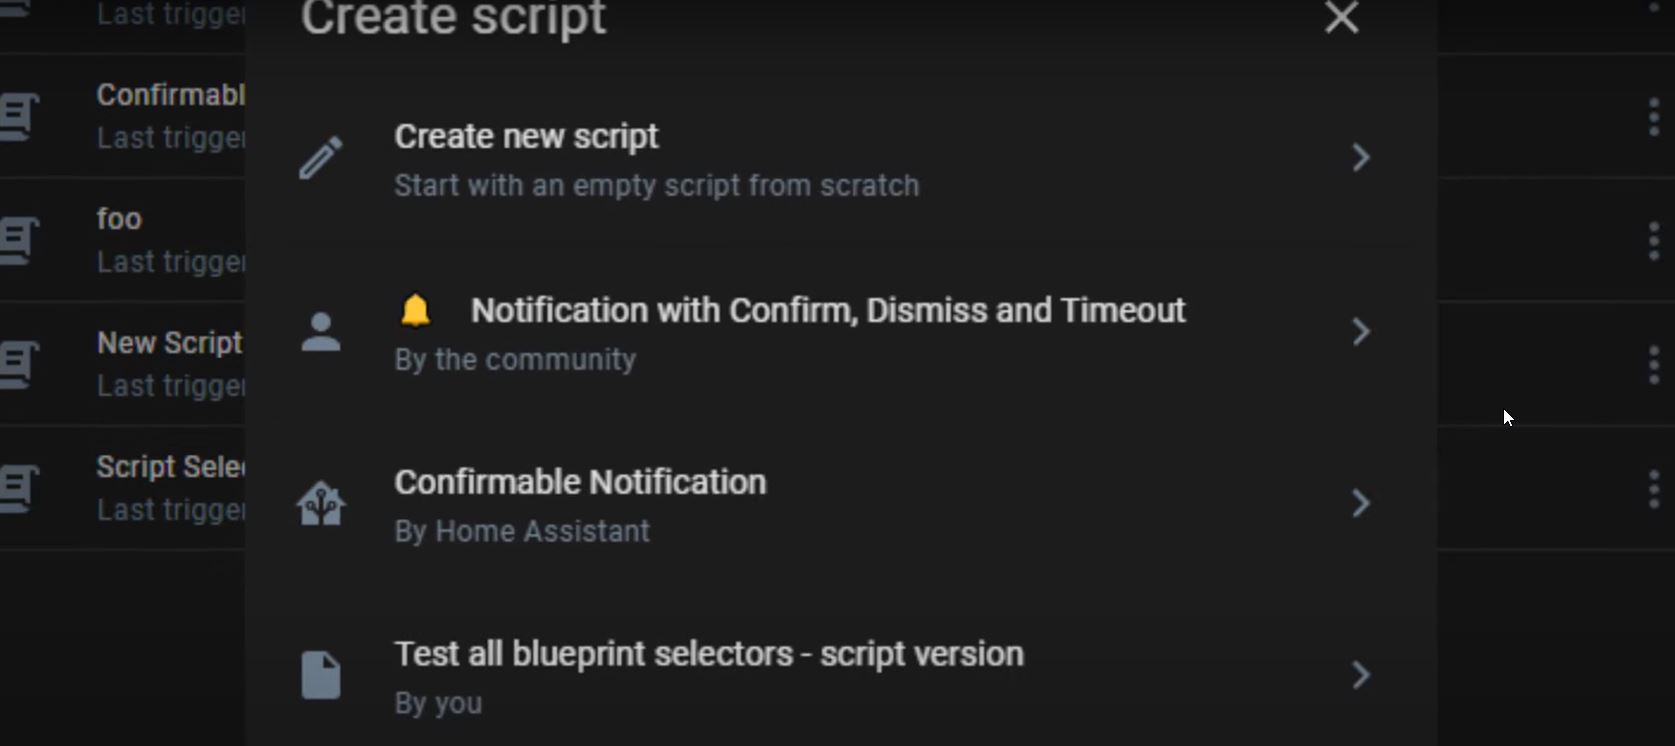 New script dialog box in Home Assistant 2023.7